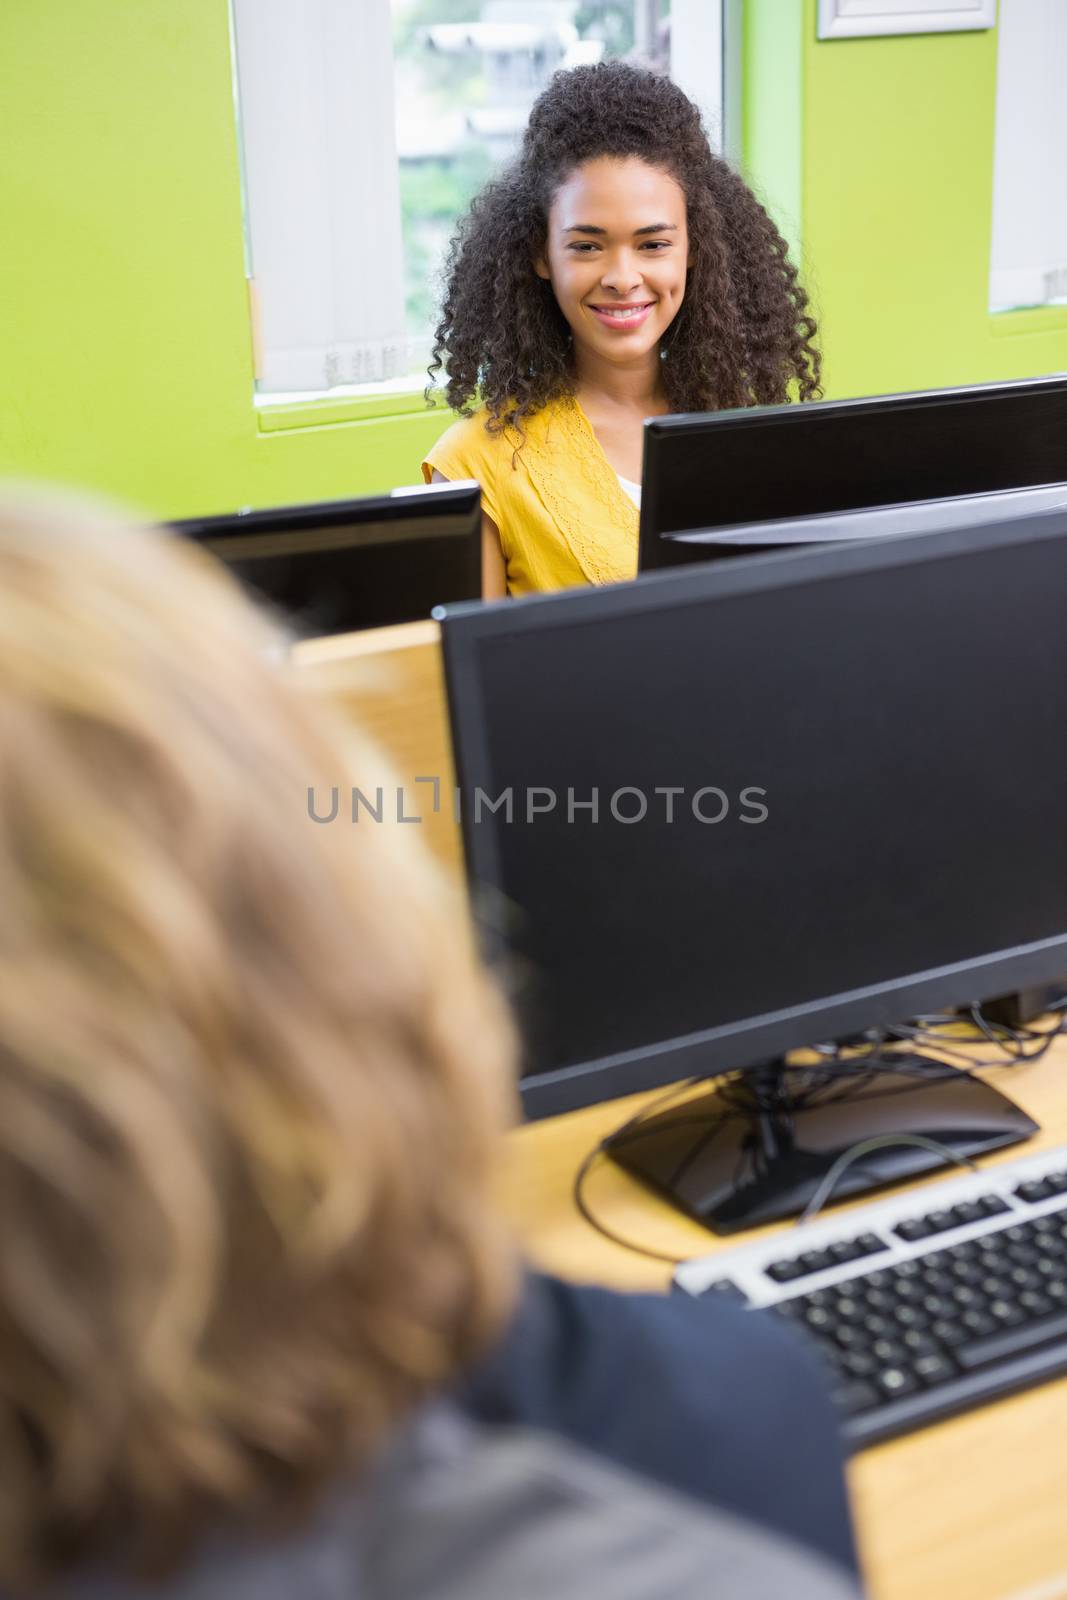 Student working on computer in classroom by Wavebreakmedia